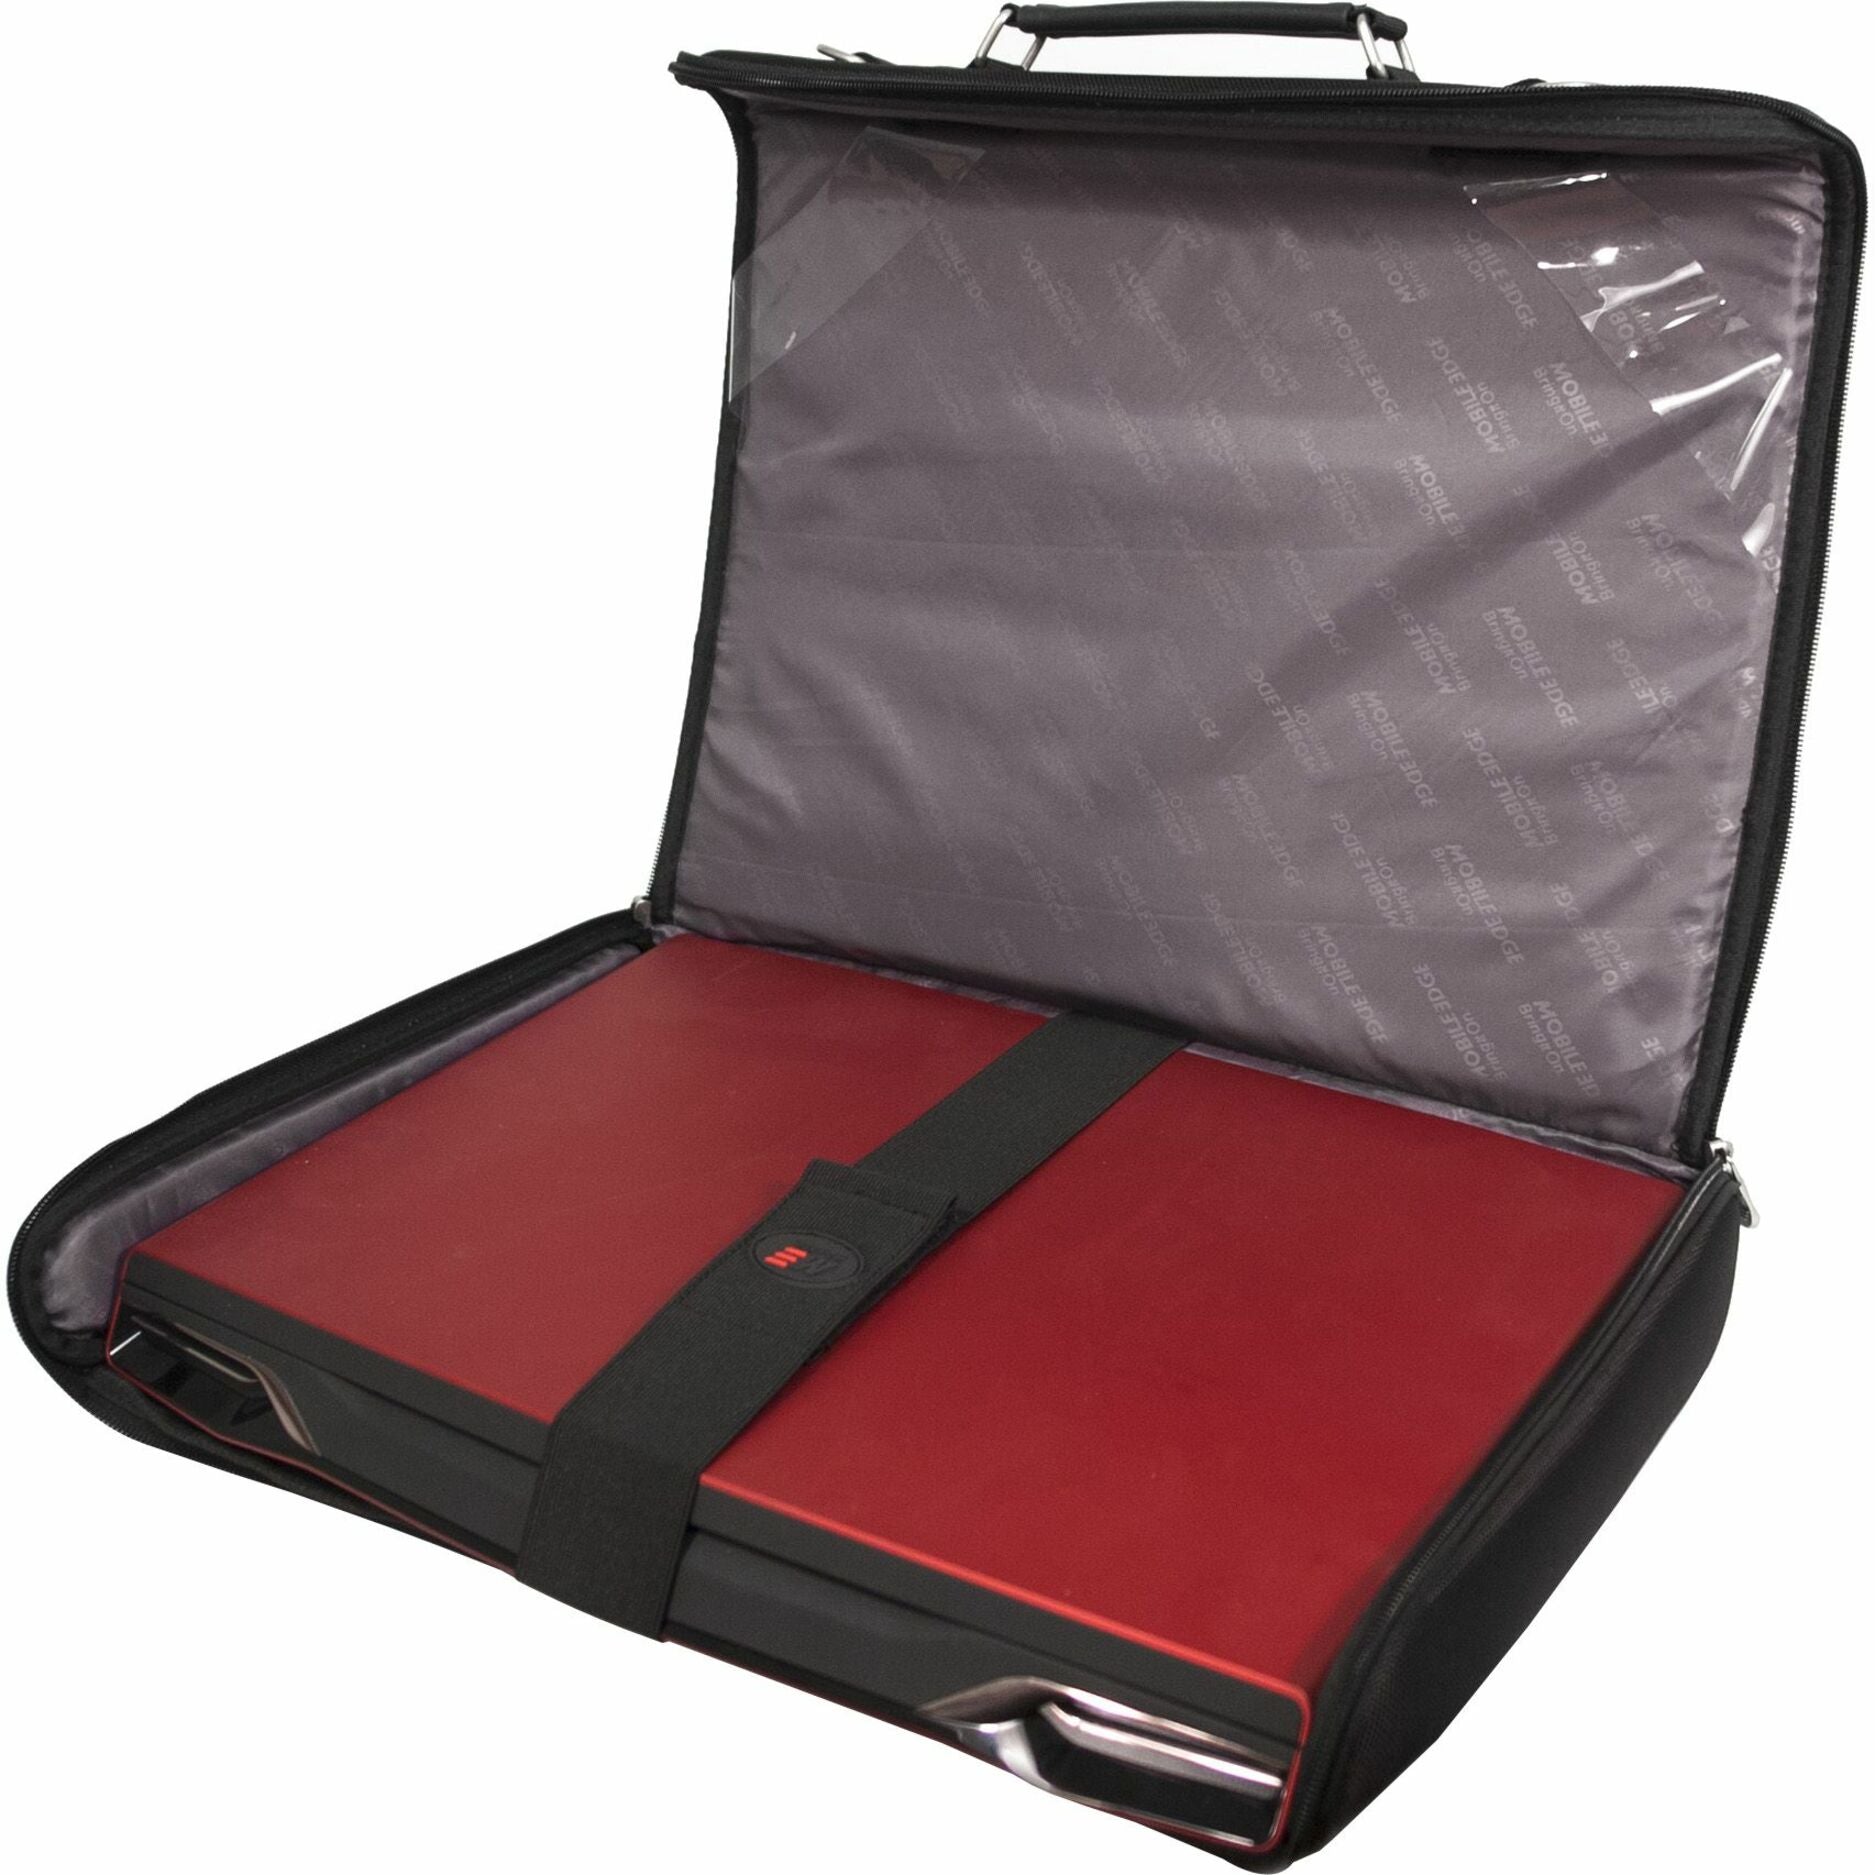 Mobile Edge MEEN217 2.0 Express Notebook Case 17" - Black, Carrying Case for 17" Chromebook